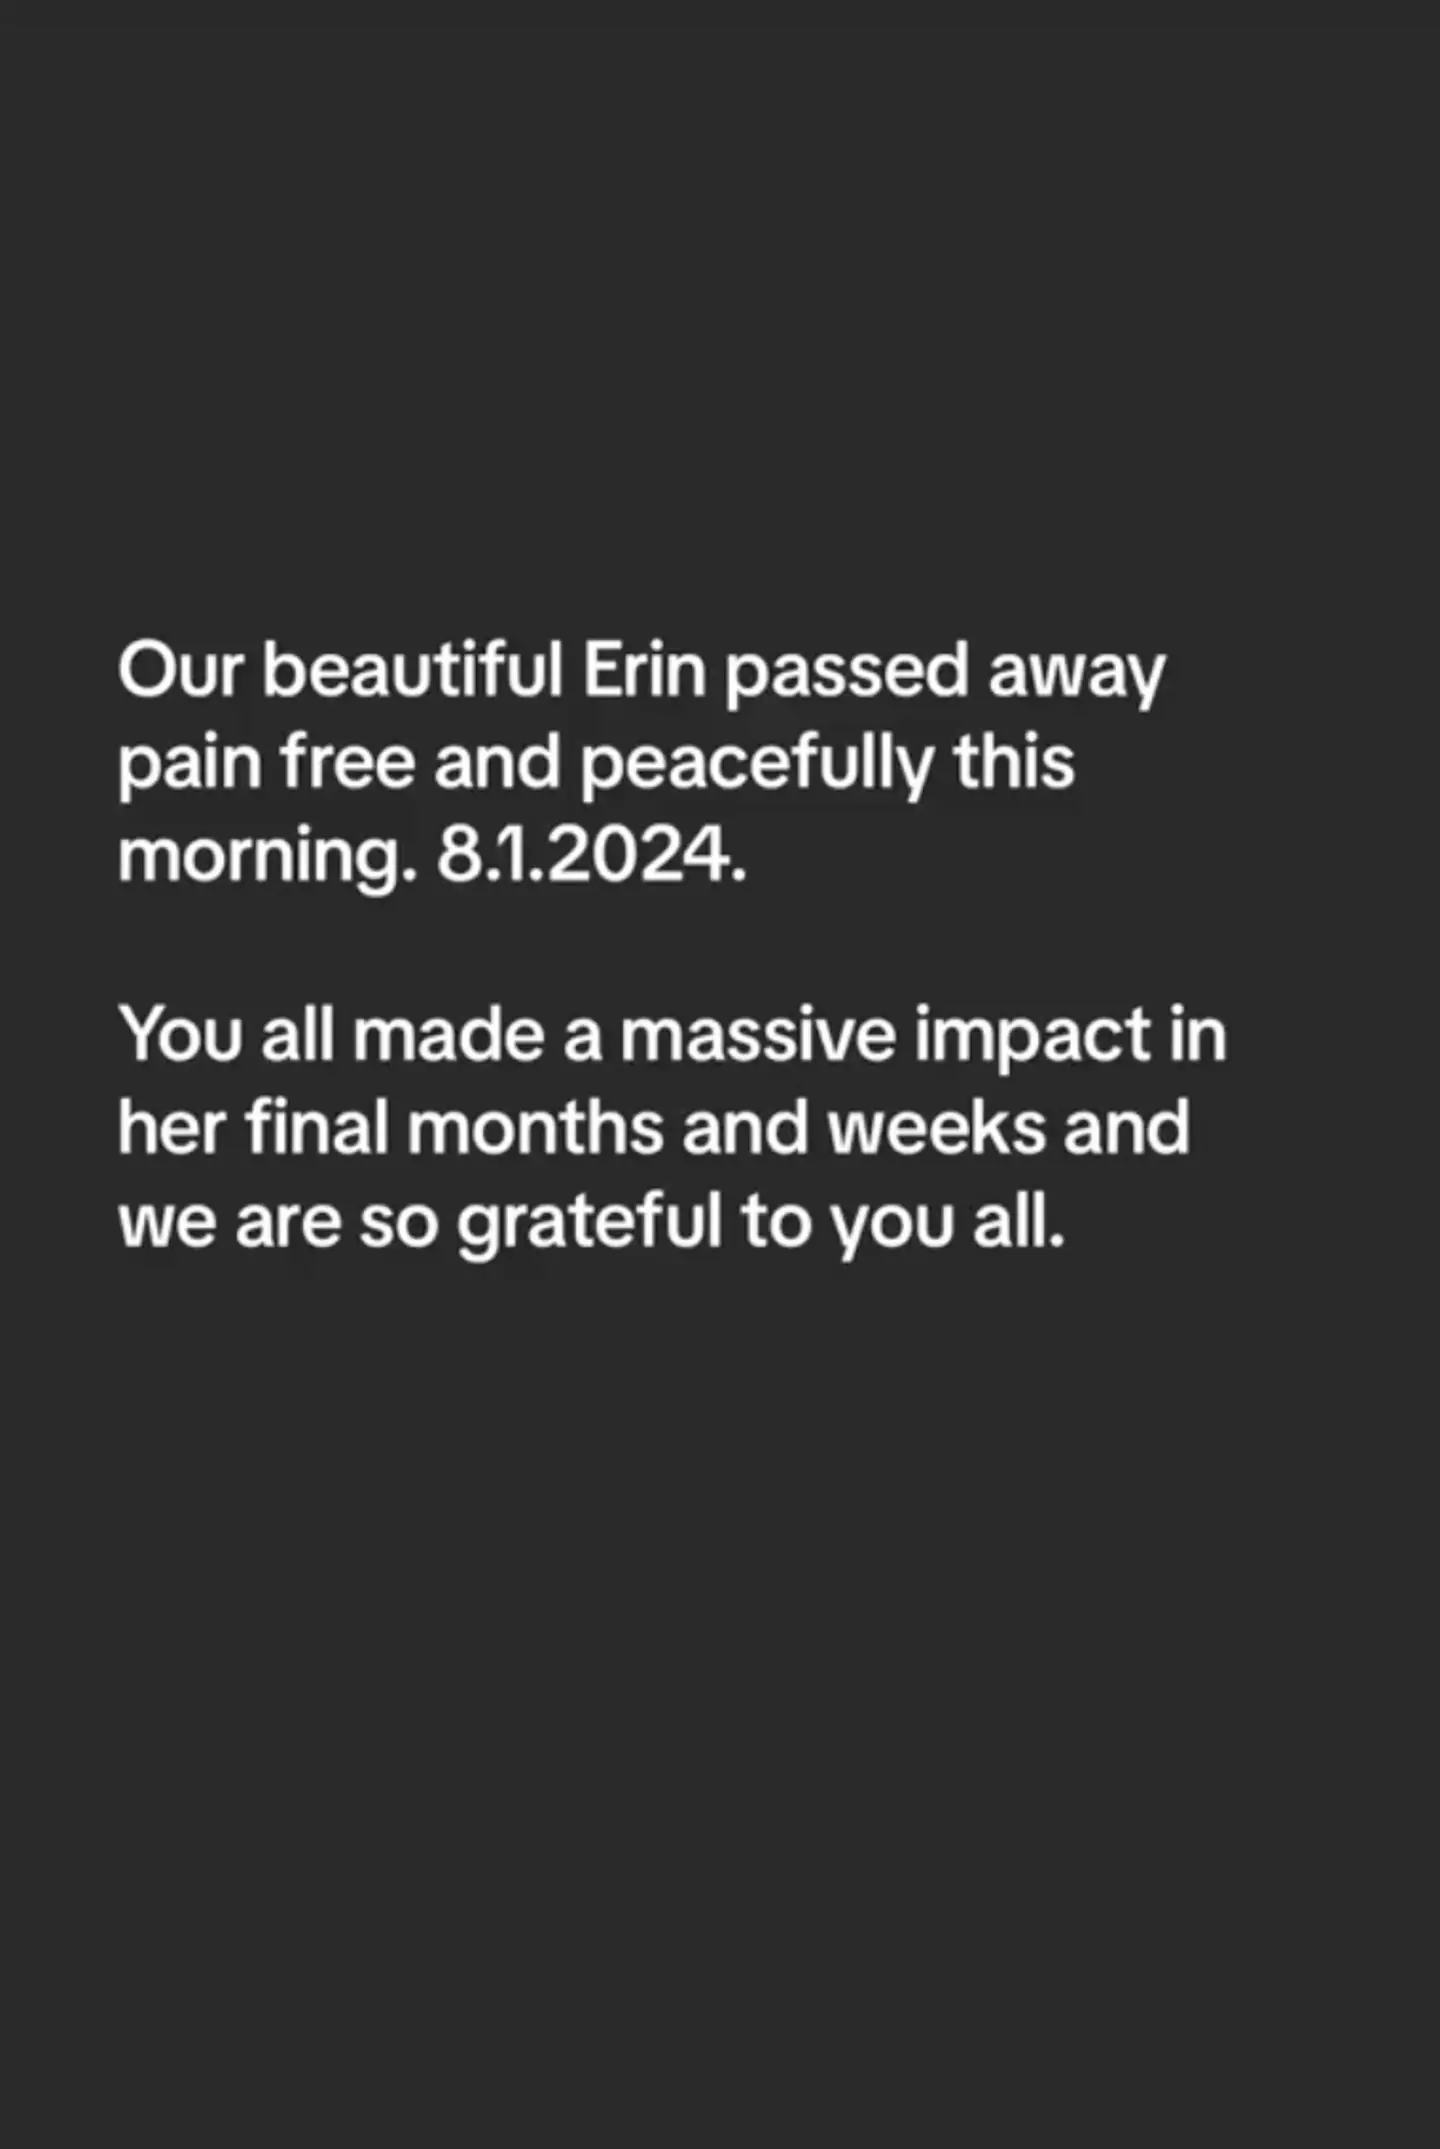 Erin's family announced she died earlier this month (8 January).